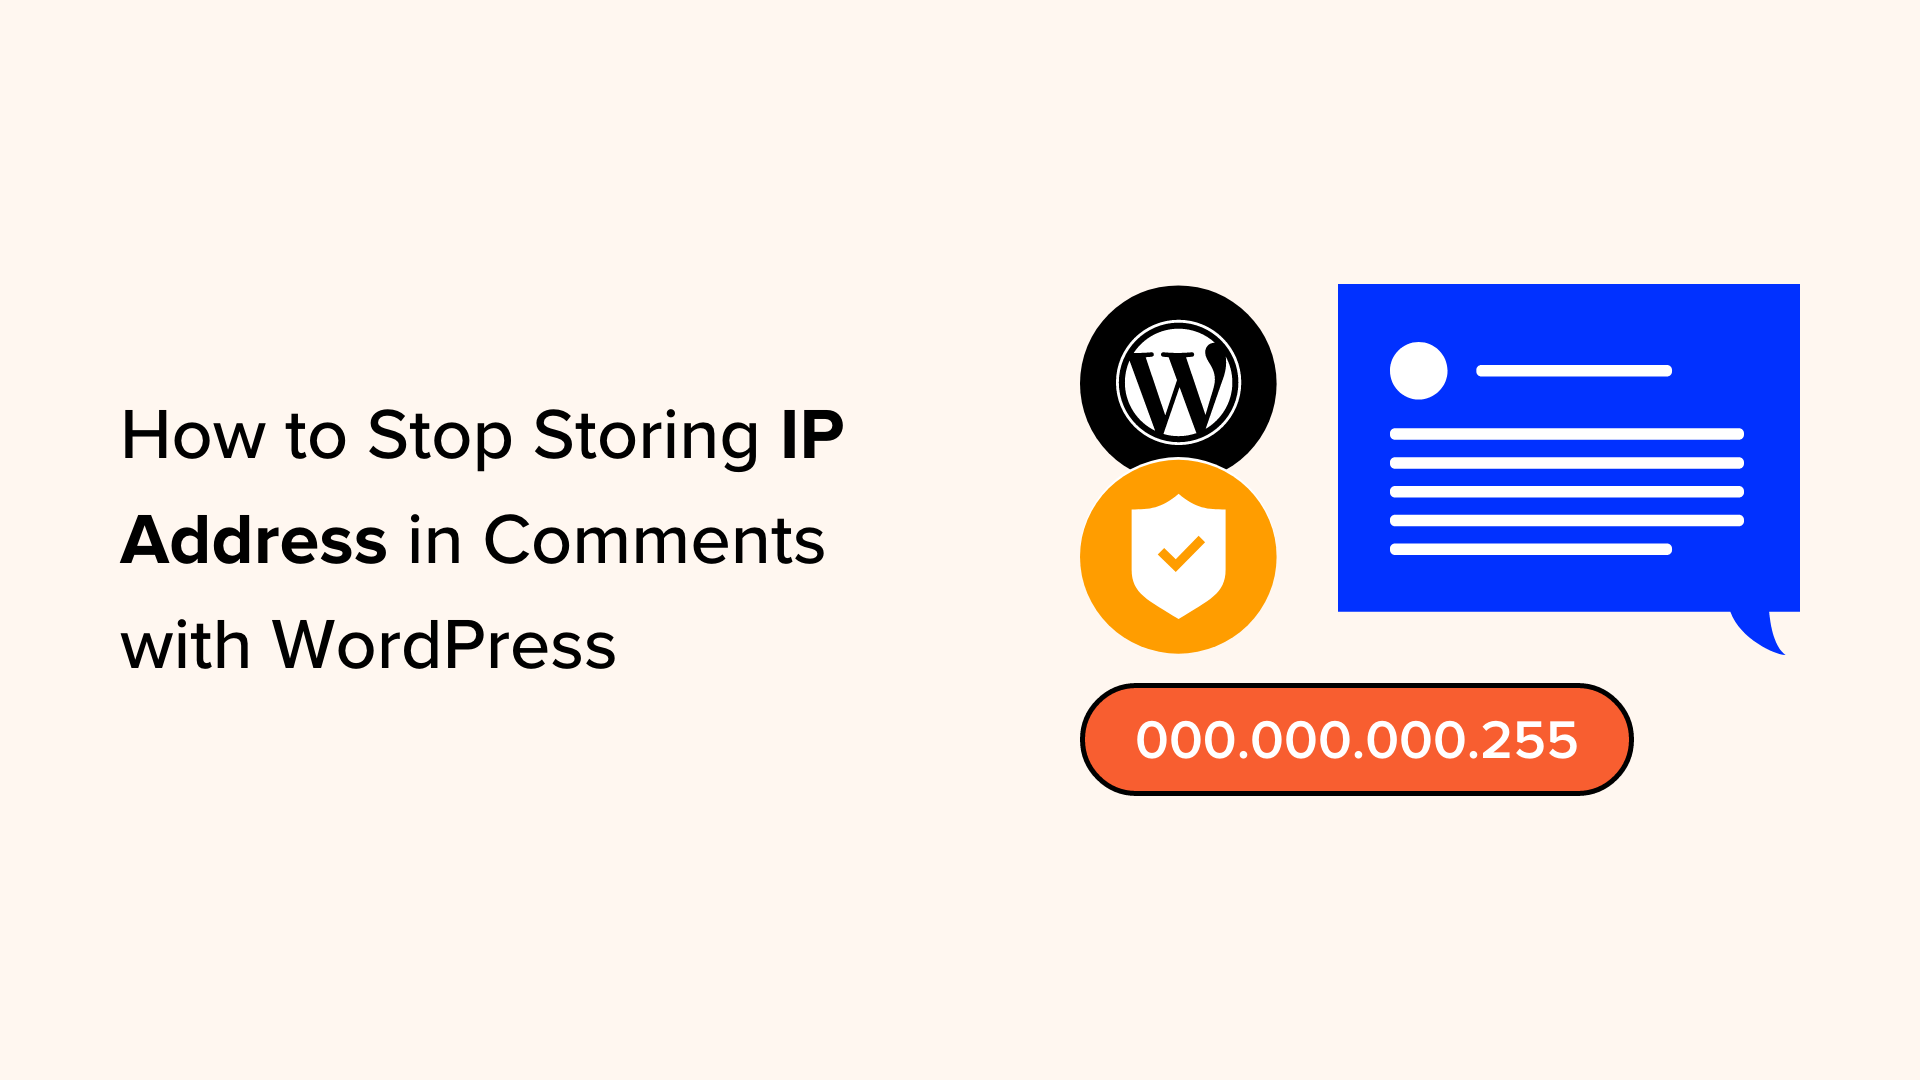 how to stop storing ip address in wordpress comments facebook